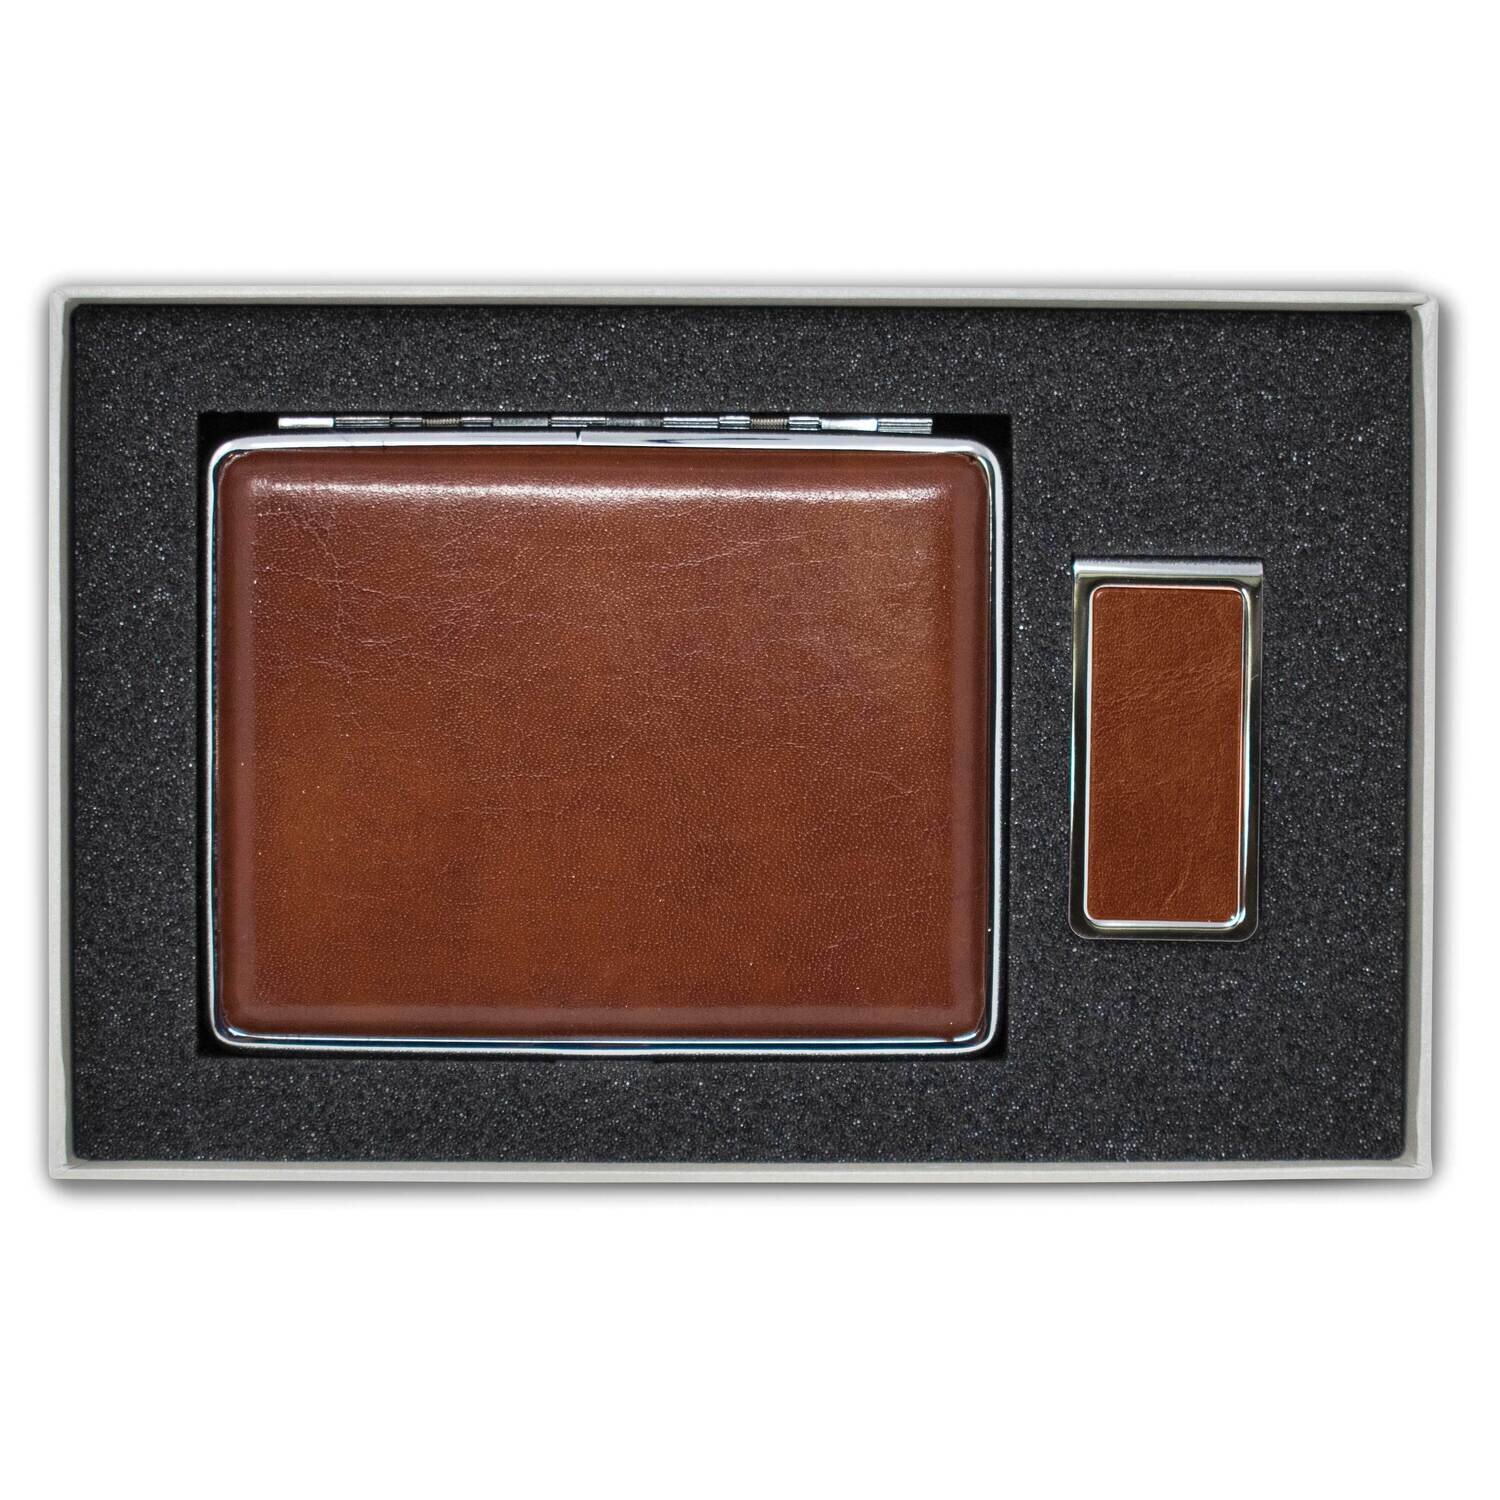 Smooth Tan Leather Covered Money Clip 20-Cigarette Case Set GM22587